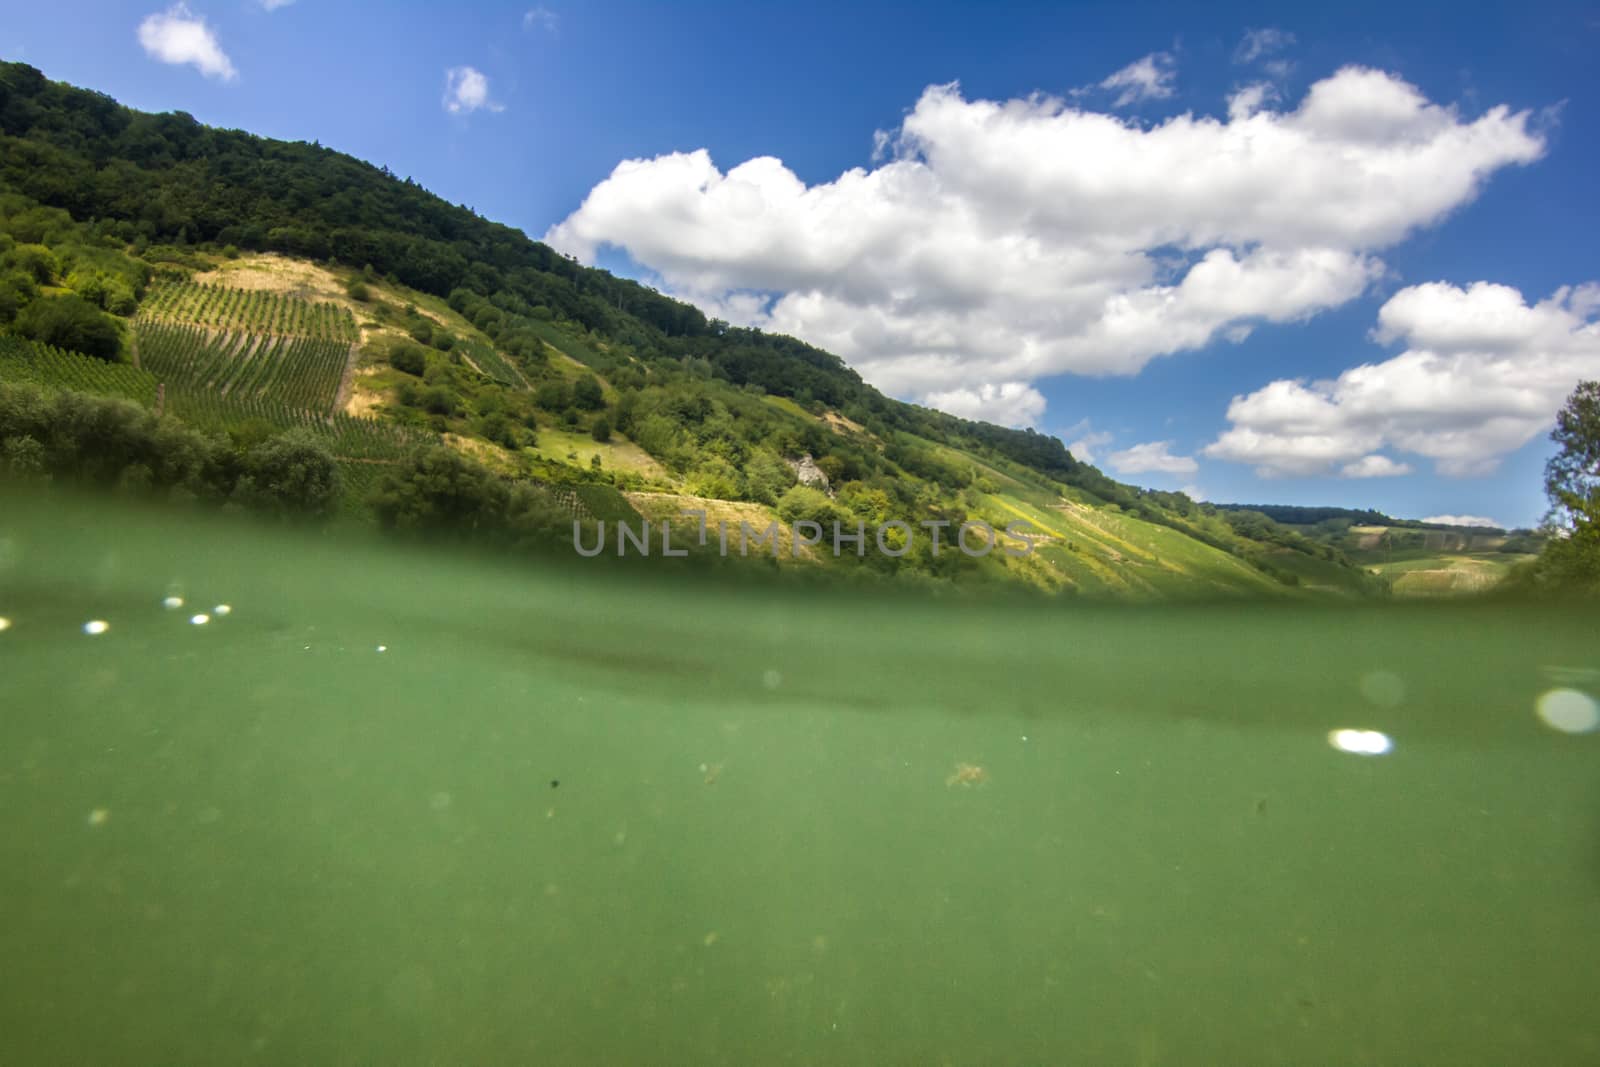 Half submerged picture of the moselle river and its landscape during a summer day.